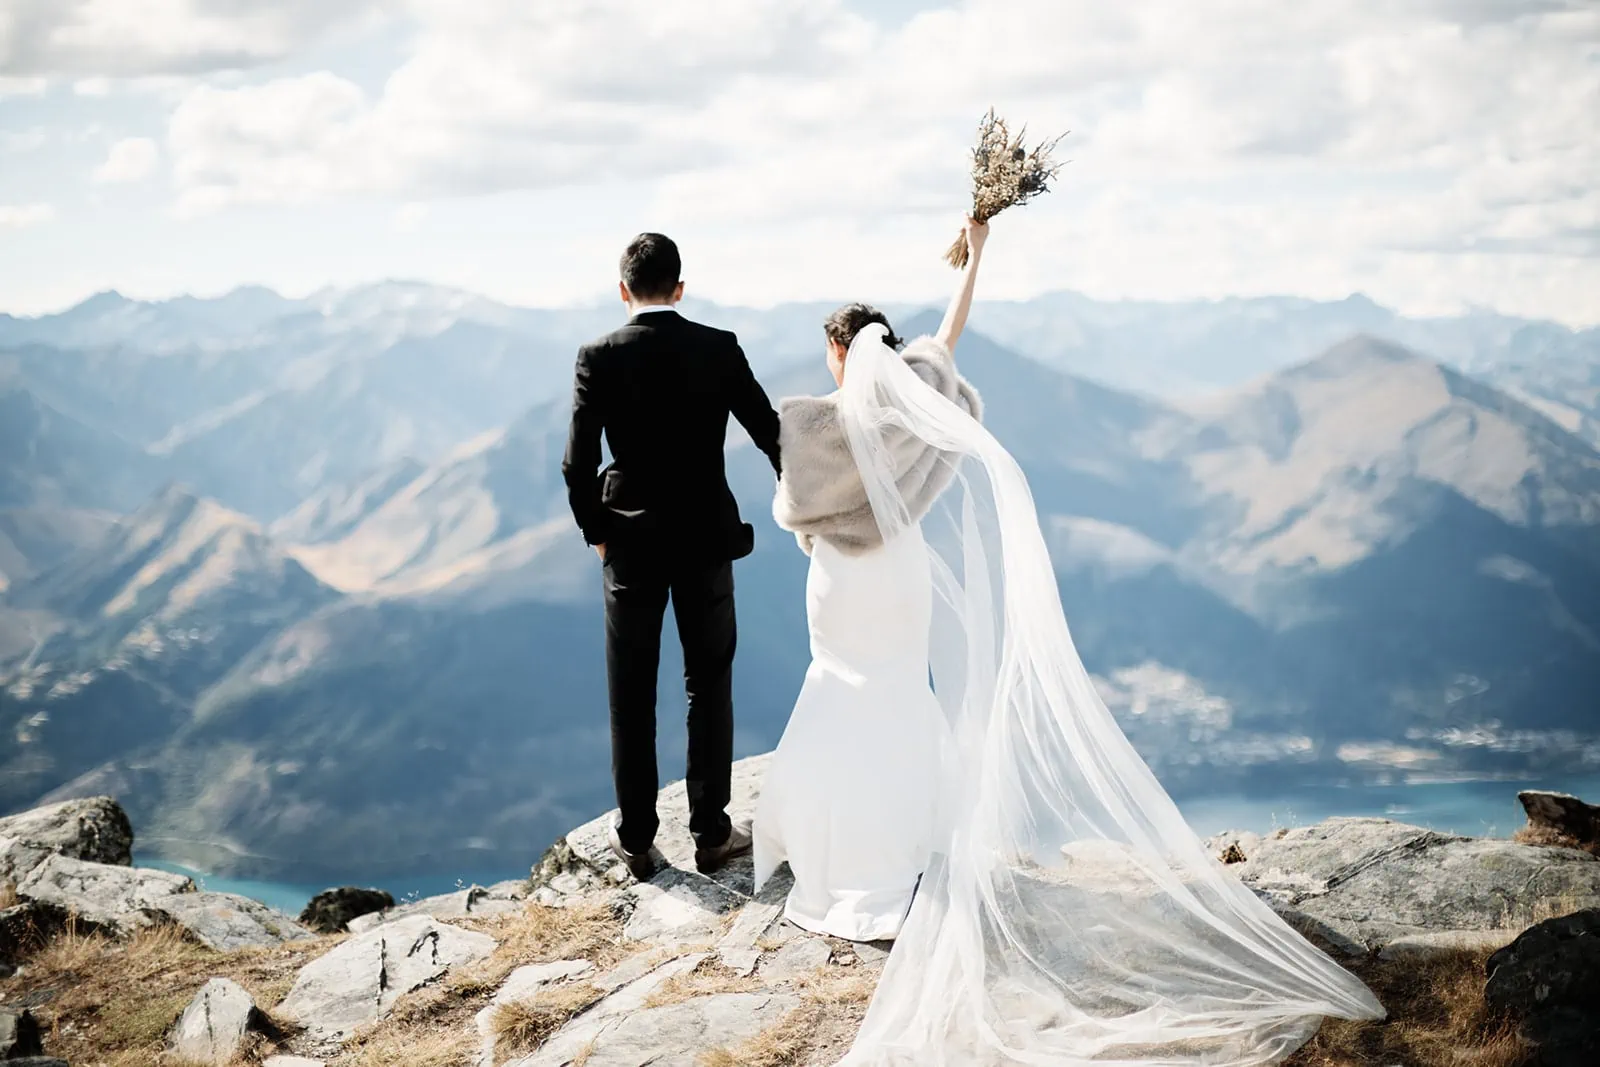 Dios & Carlyn's Queenstown Heli Pre Wedding adventure at Cecil Peak, with breathtaking mountainous backdrop.